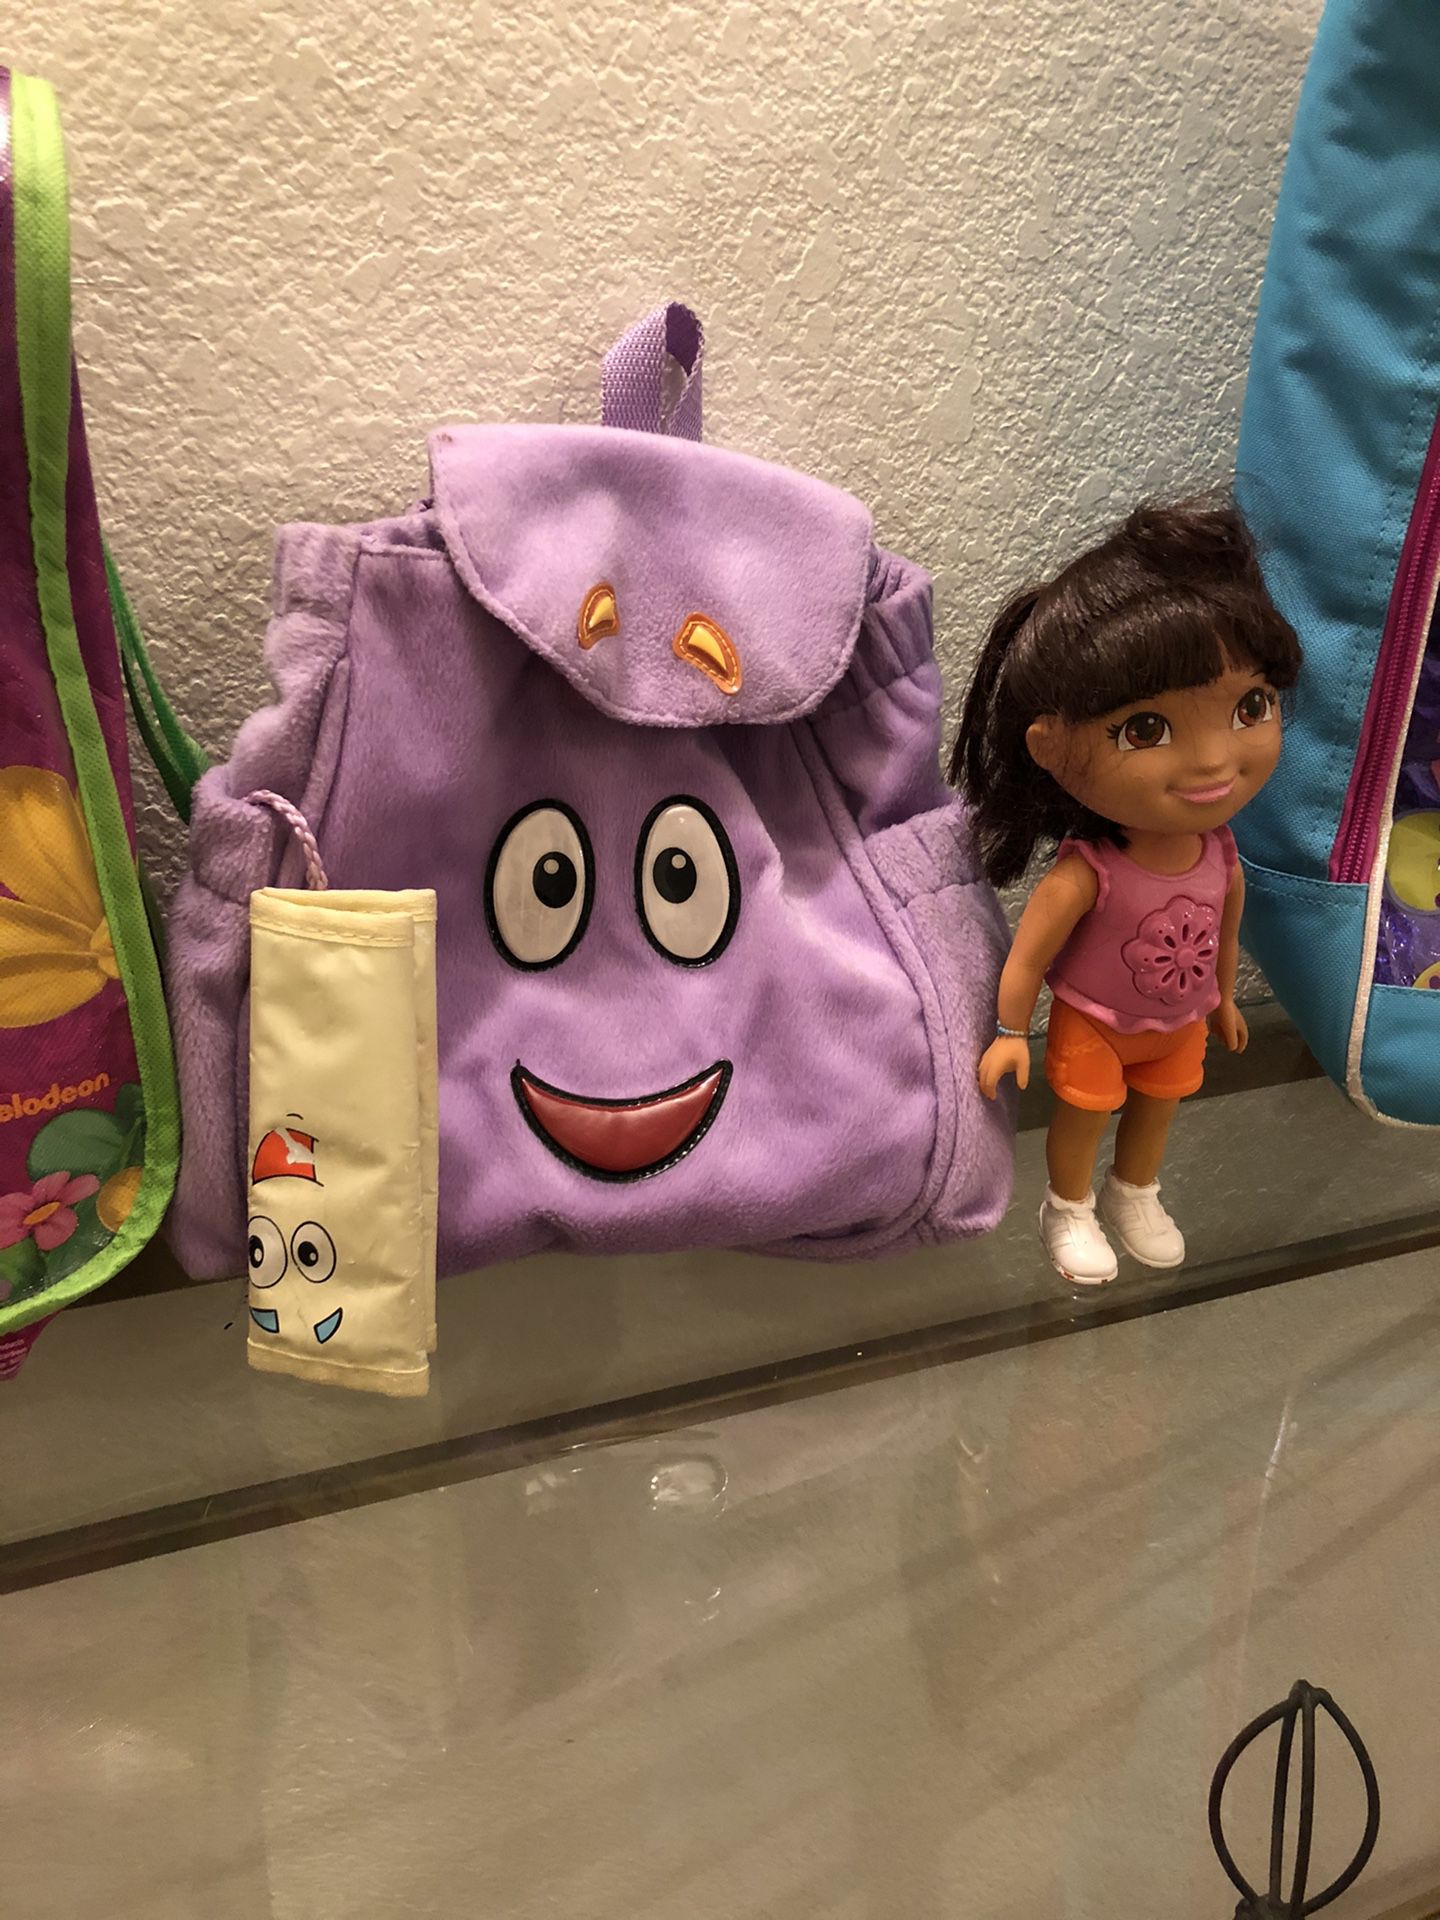 Dora talking doll and backpack!!!